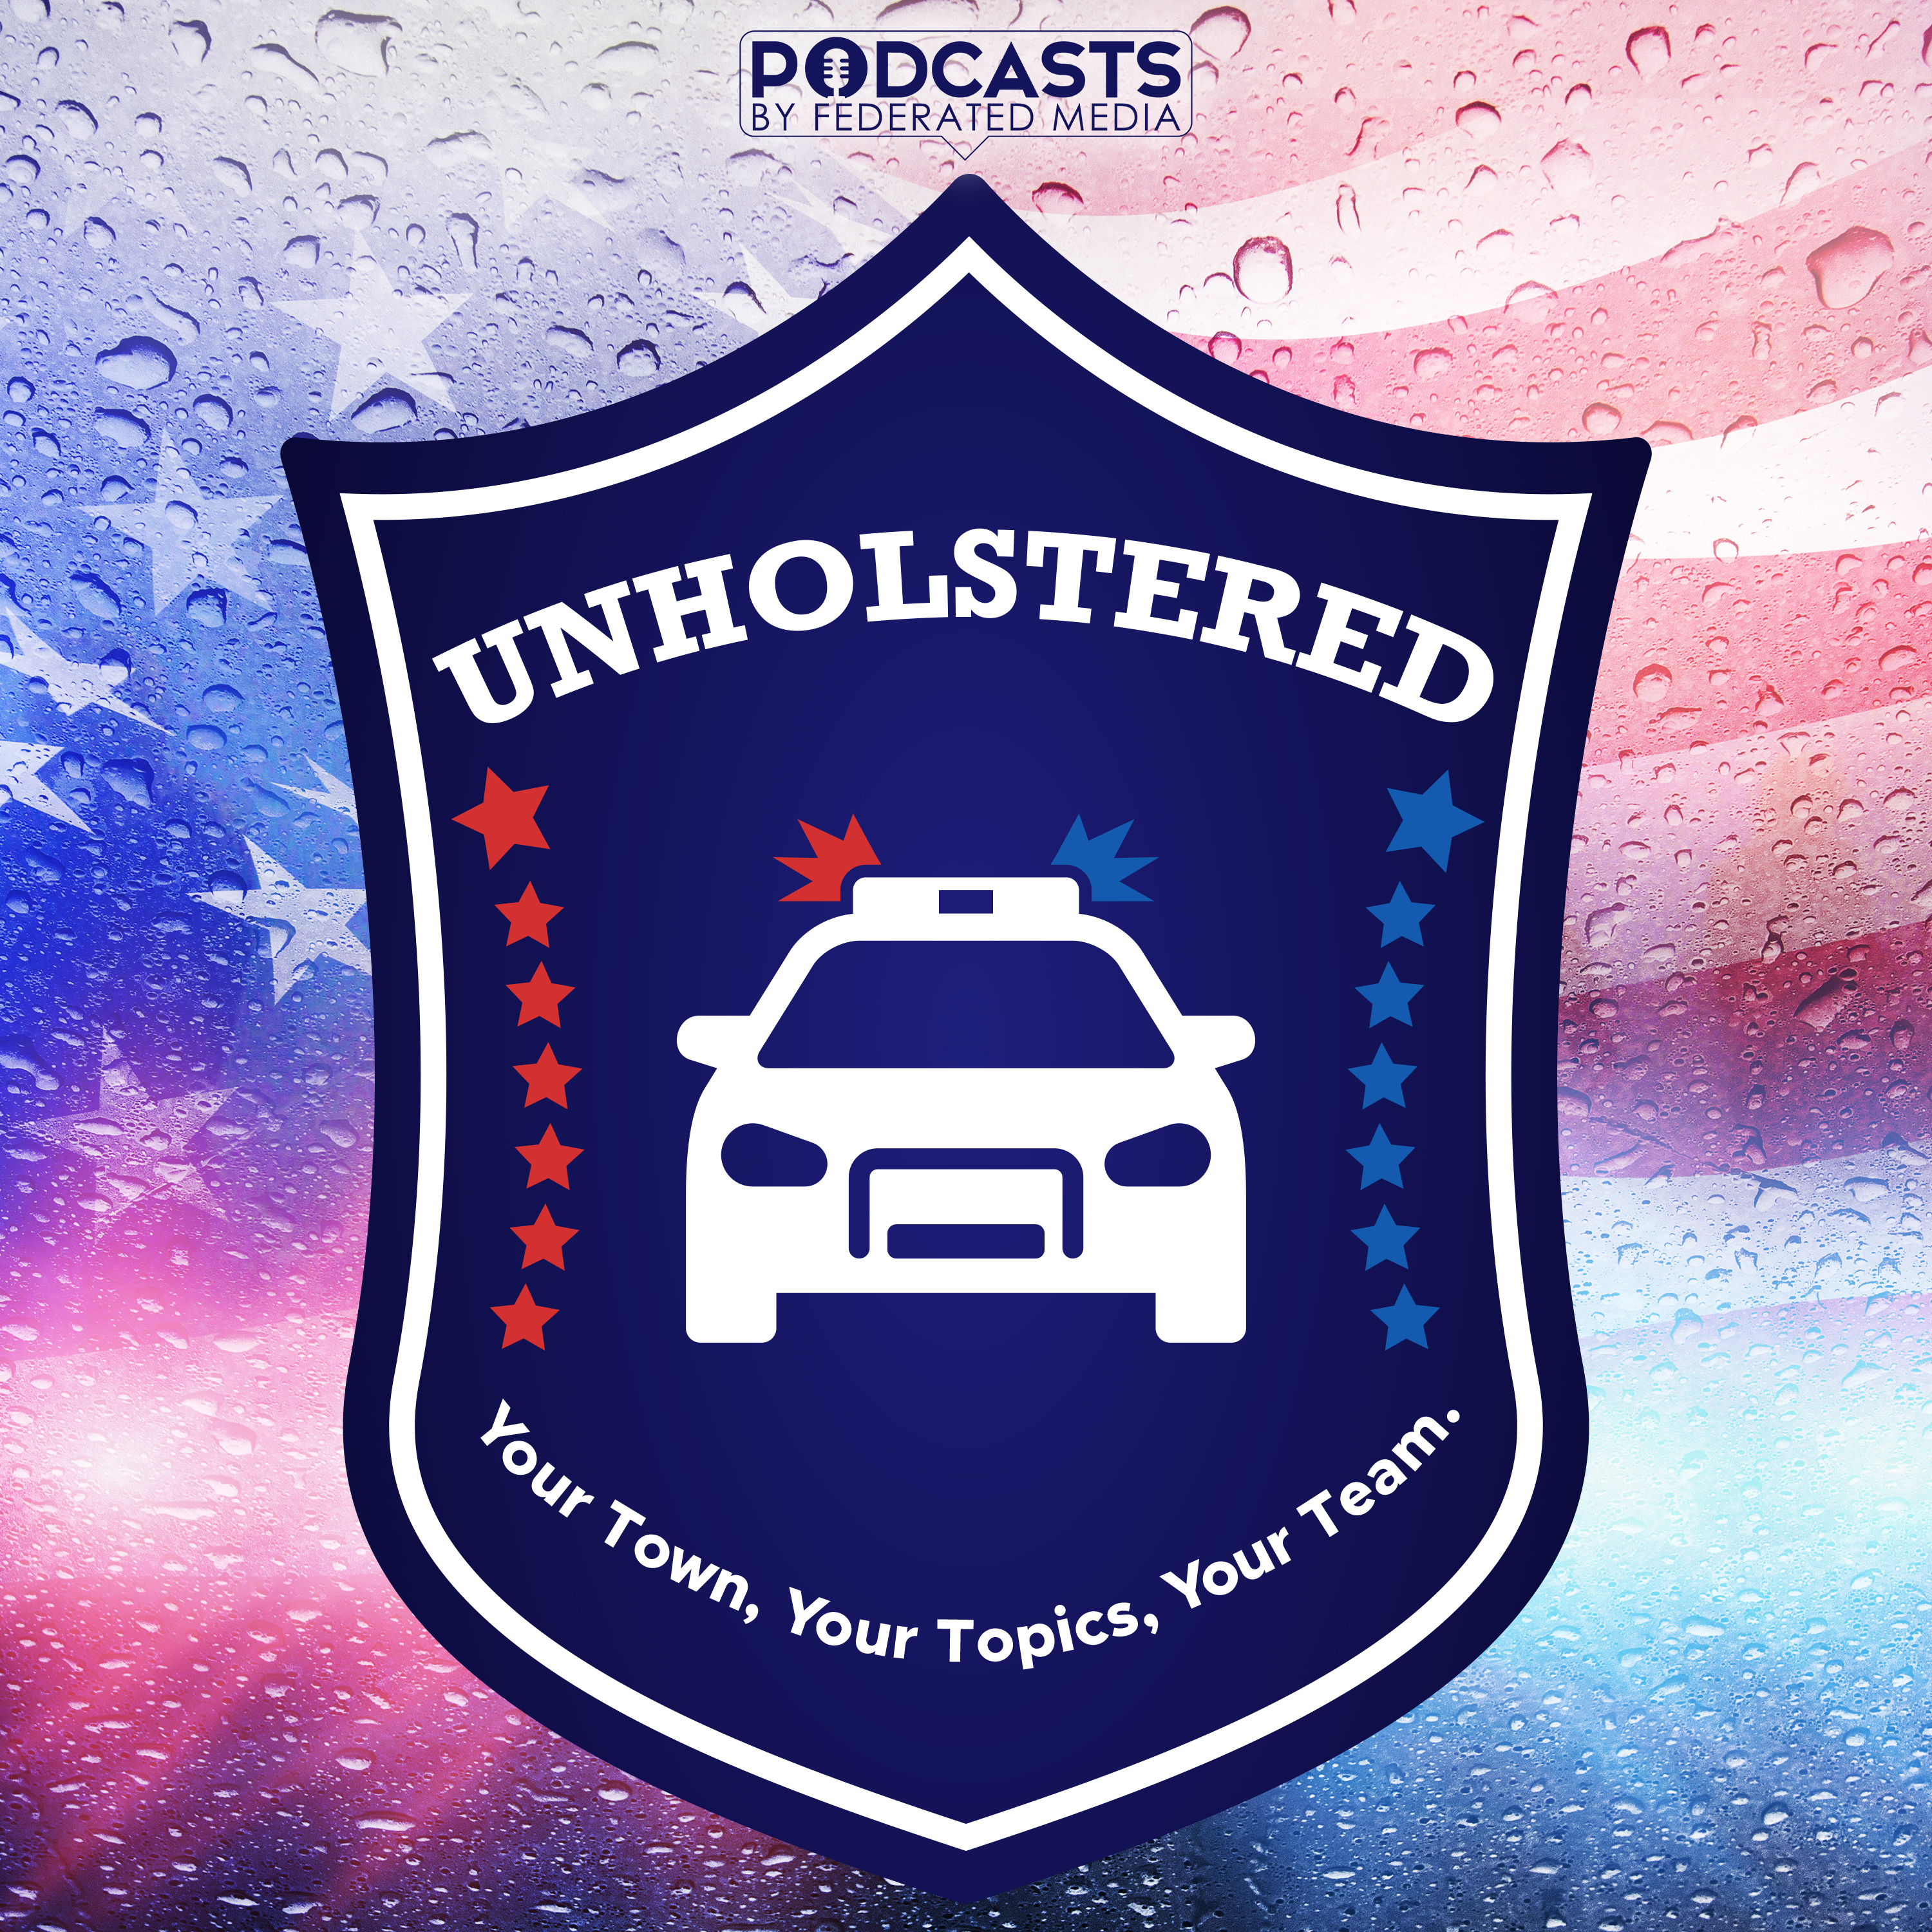 Ep 91: Non-Citizens Becoming Police Officers